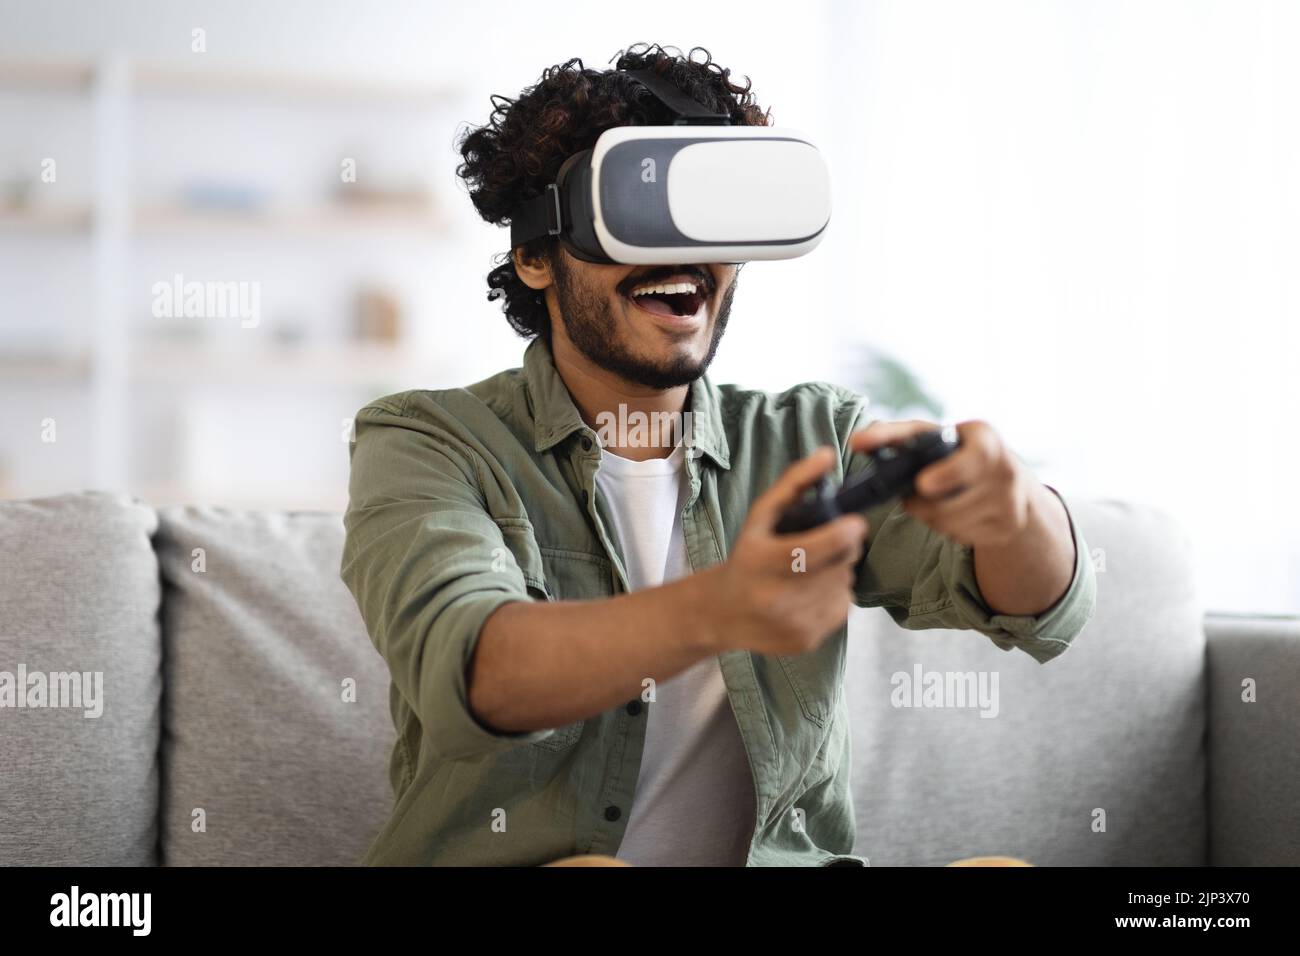 Young man trying virtual reality, playing video games Stock Photo